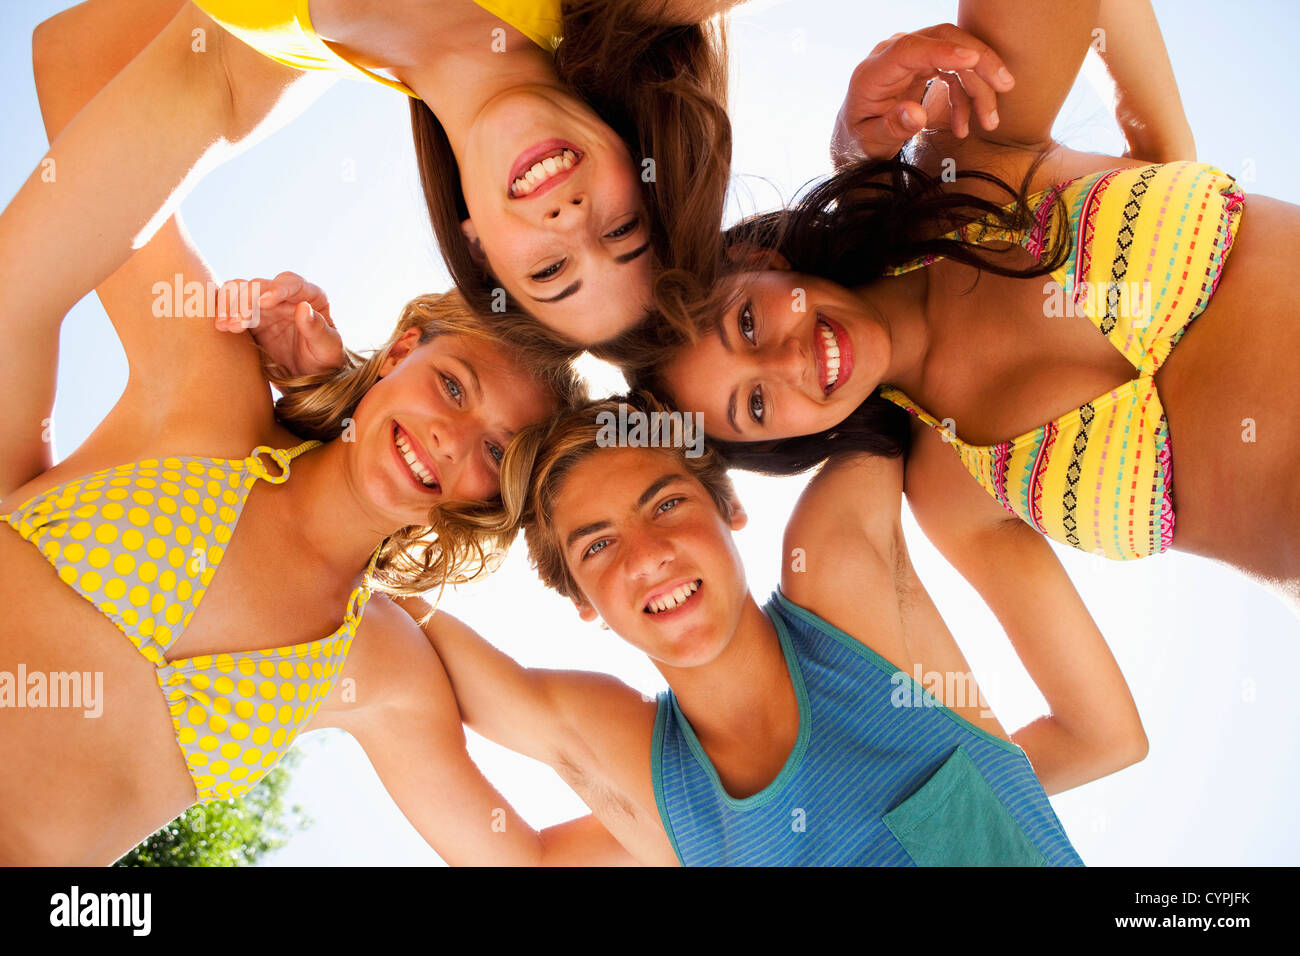 Friends hugging in circle Stock Photo